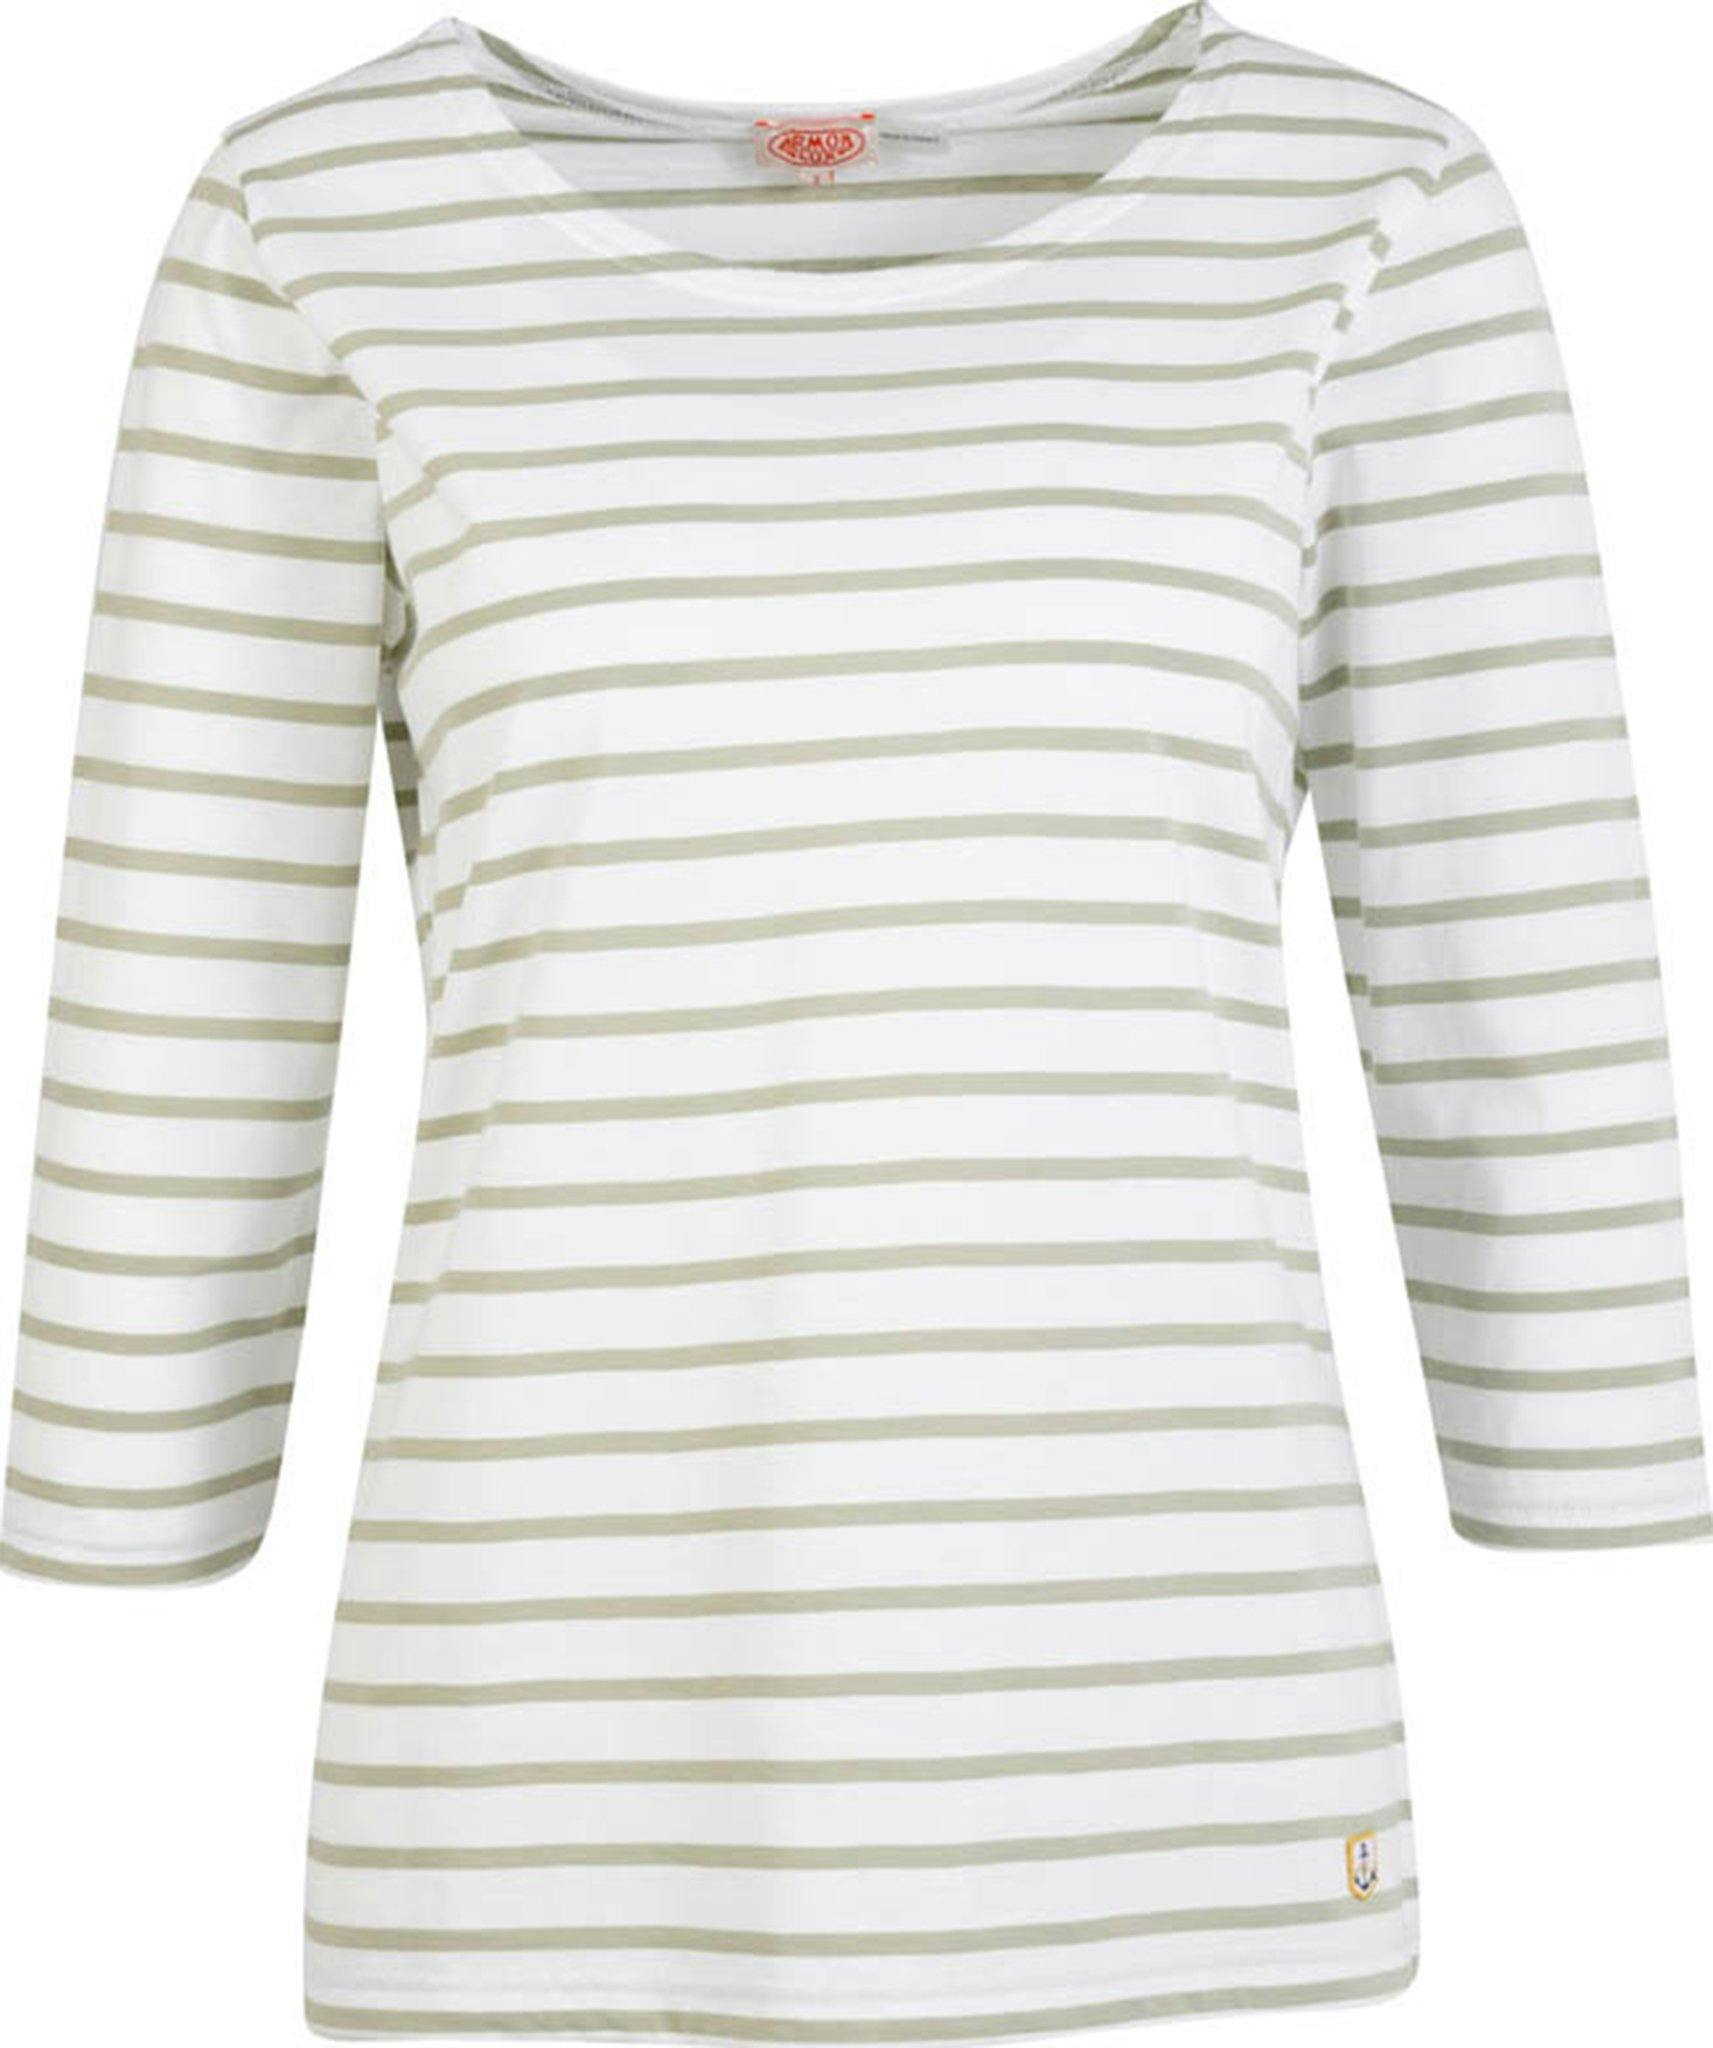 Product image for Cap Coz 3/4 Sleeves Breton Striped Jersey - Women's